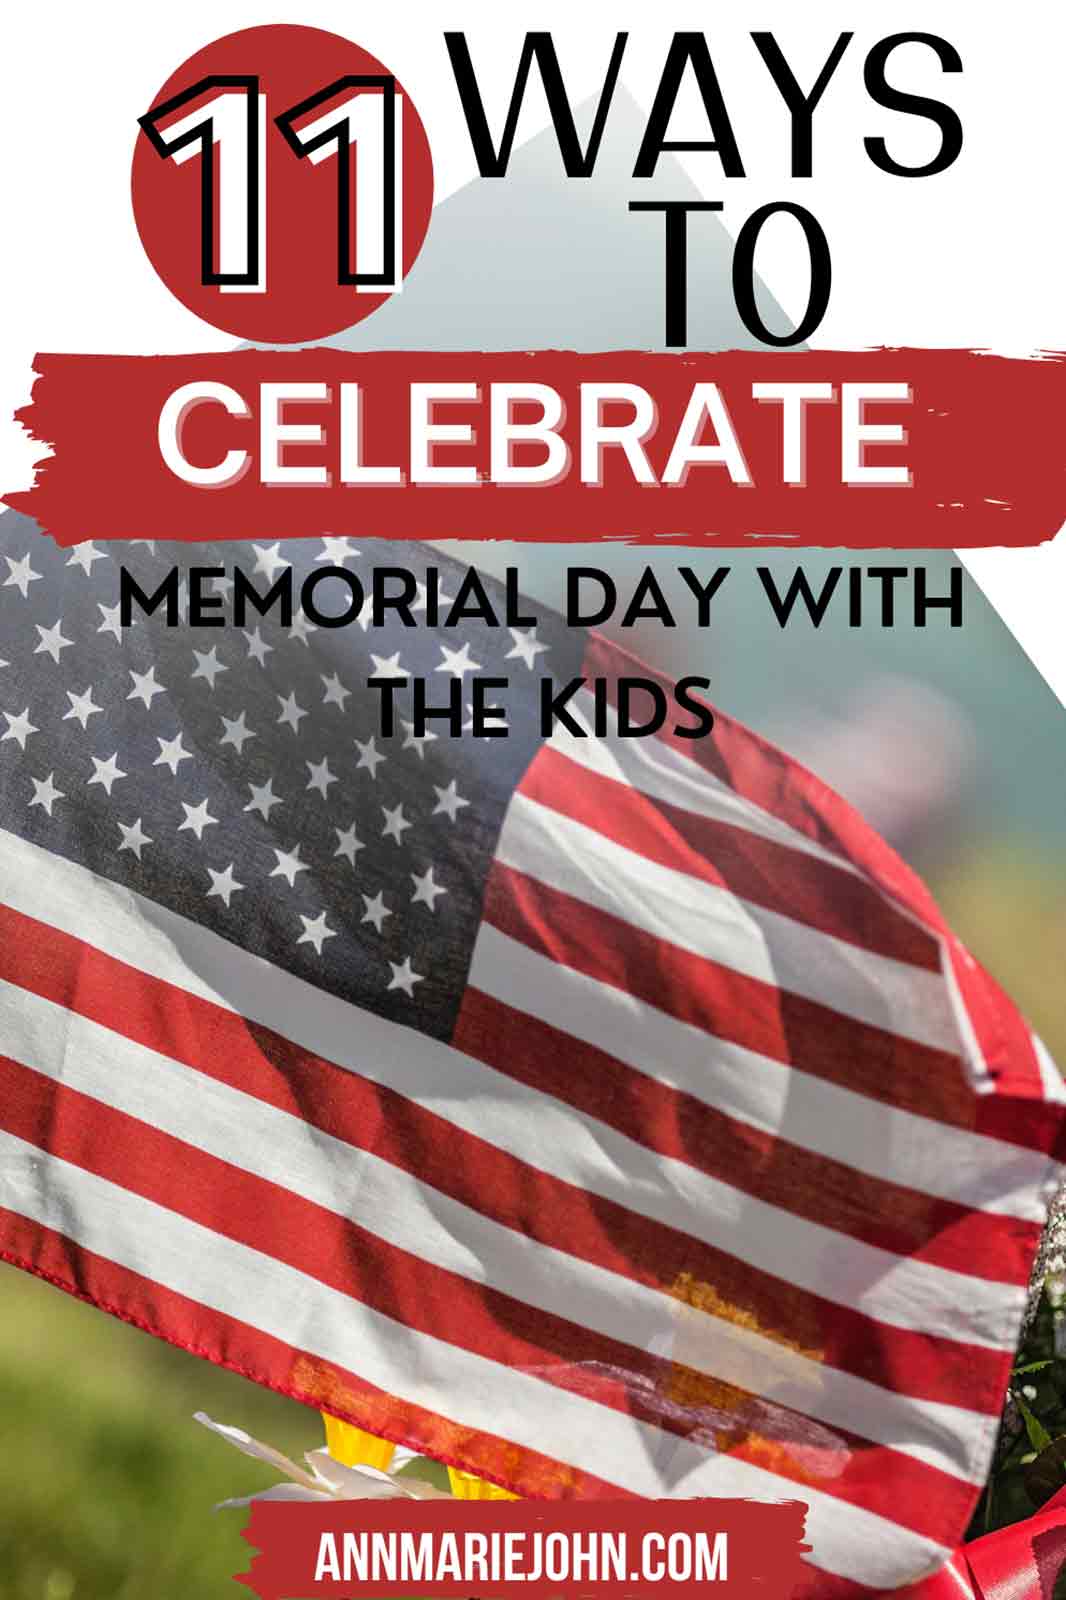 11 Ways To Celebrate Memorial Day With Kids Annmarie John